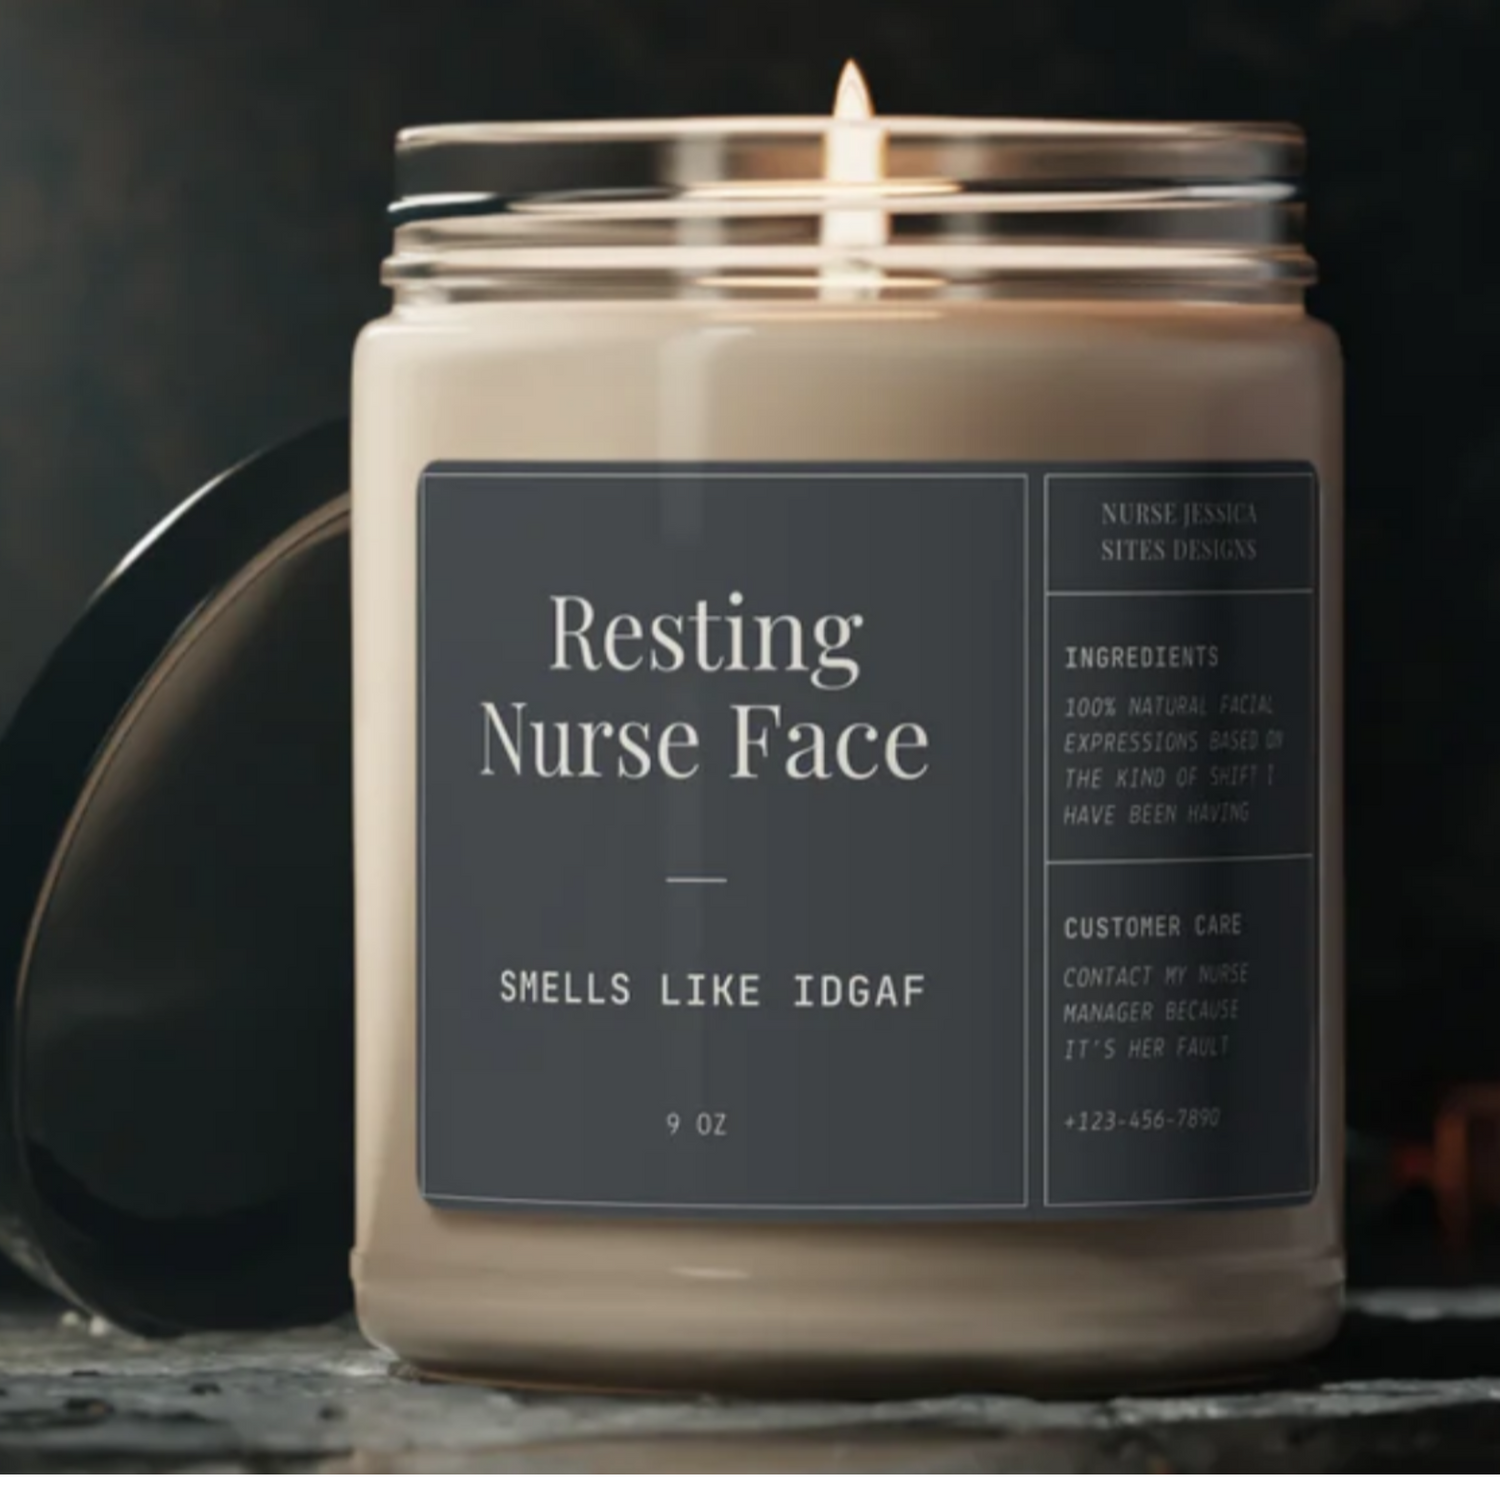 A candle that says "Resting Nurse Face"